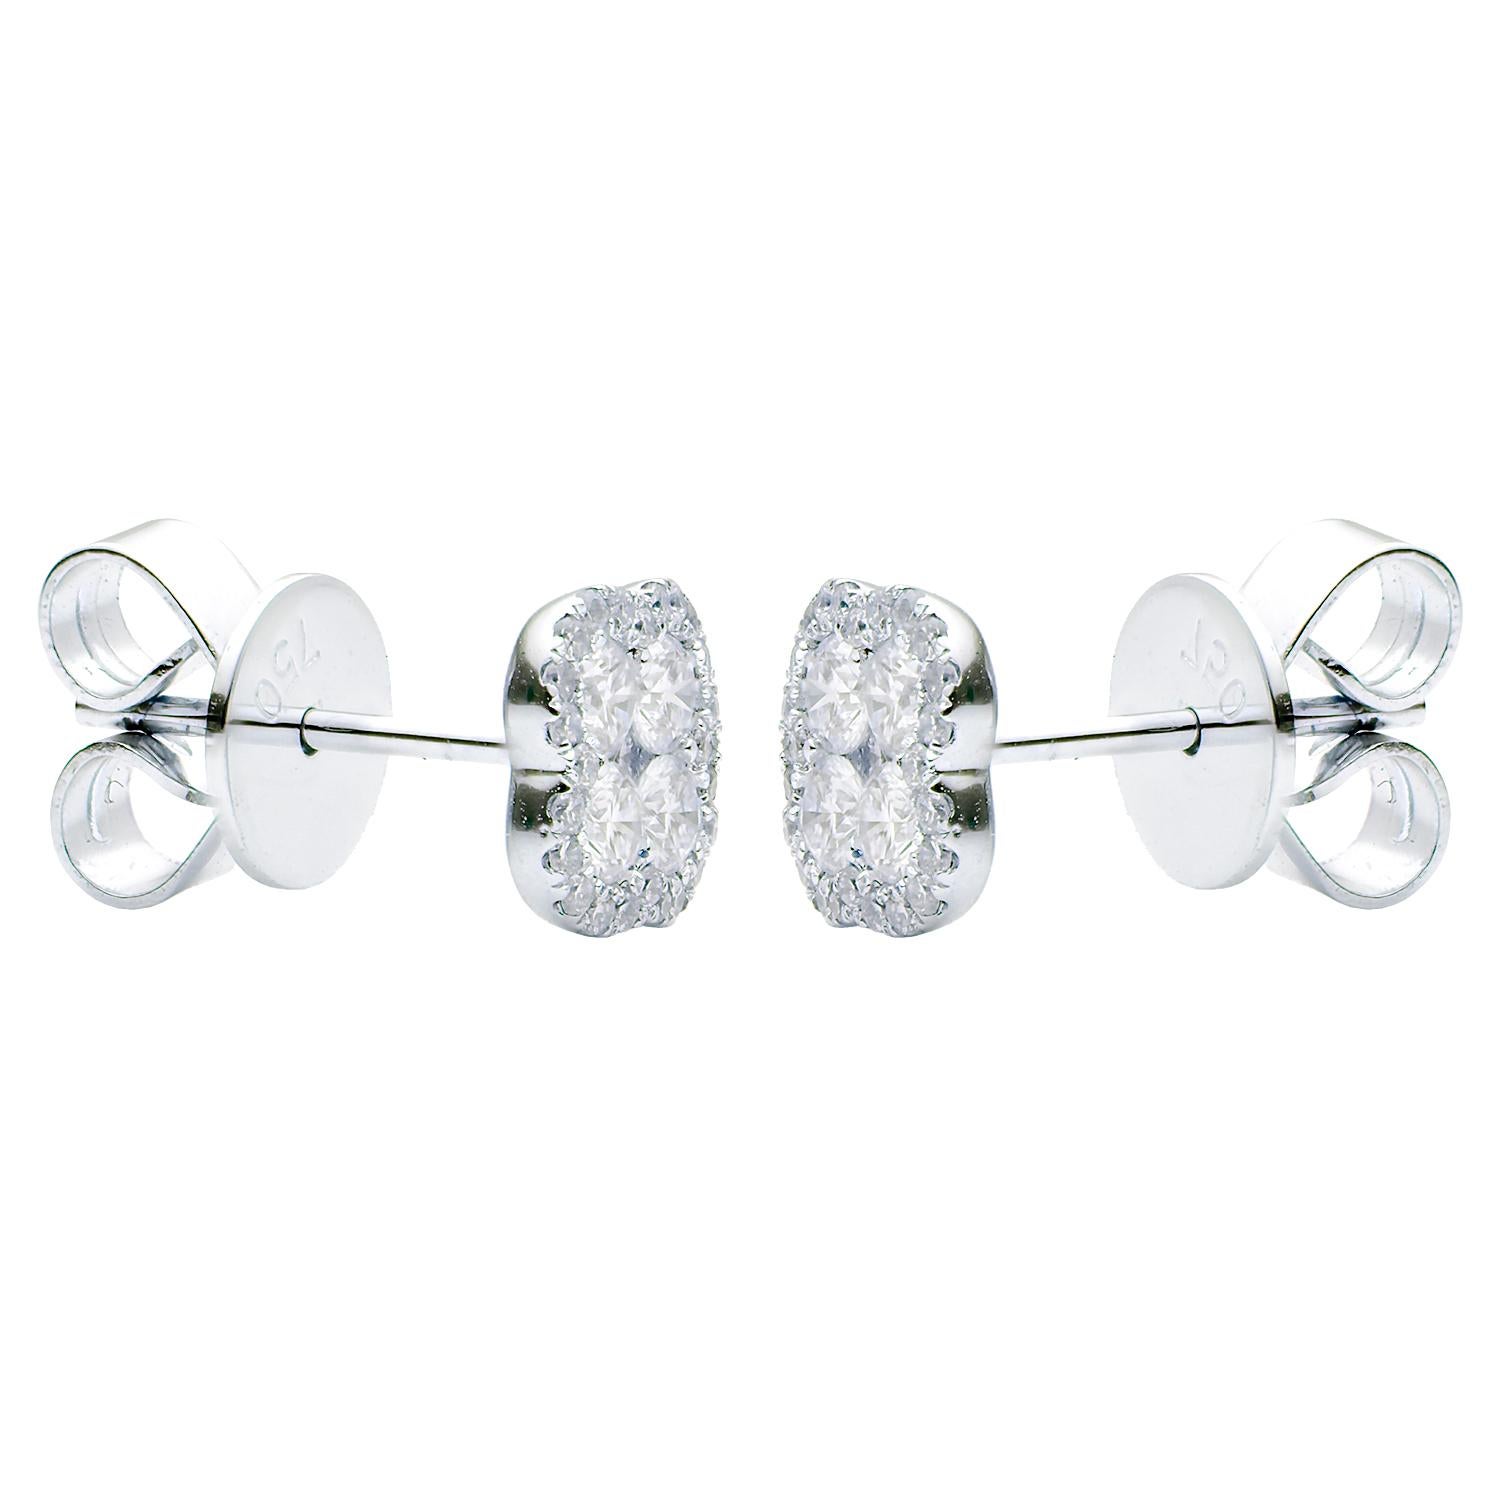 Contemporary 18 Karat White Gold Diamond Cluster Stud Earrings with Halo For Sale